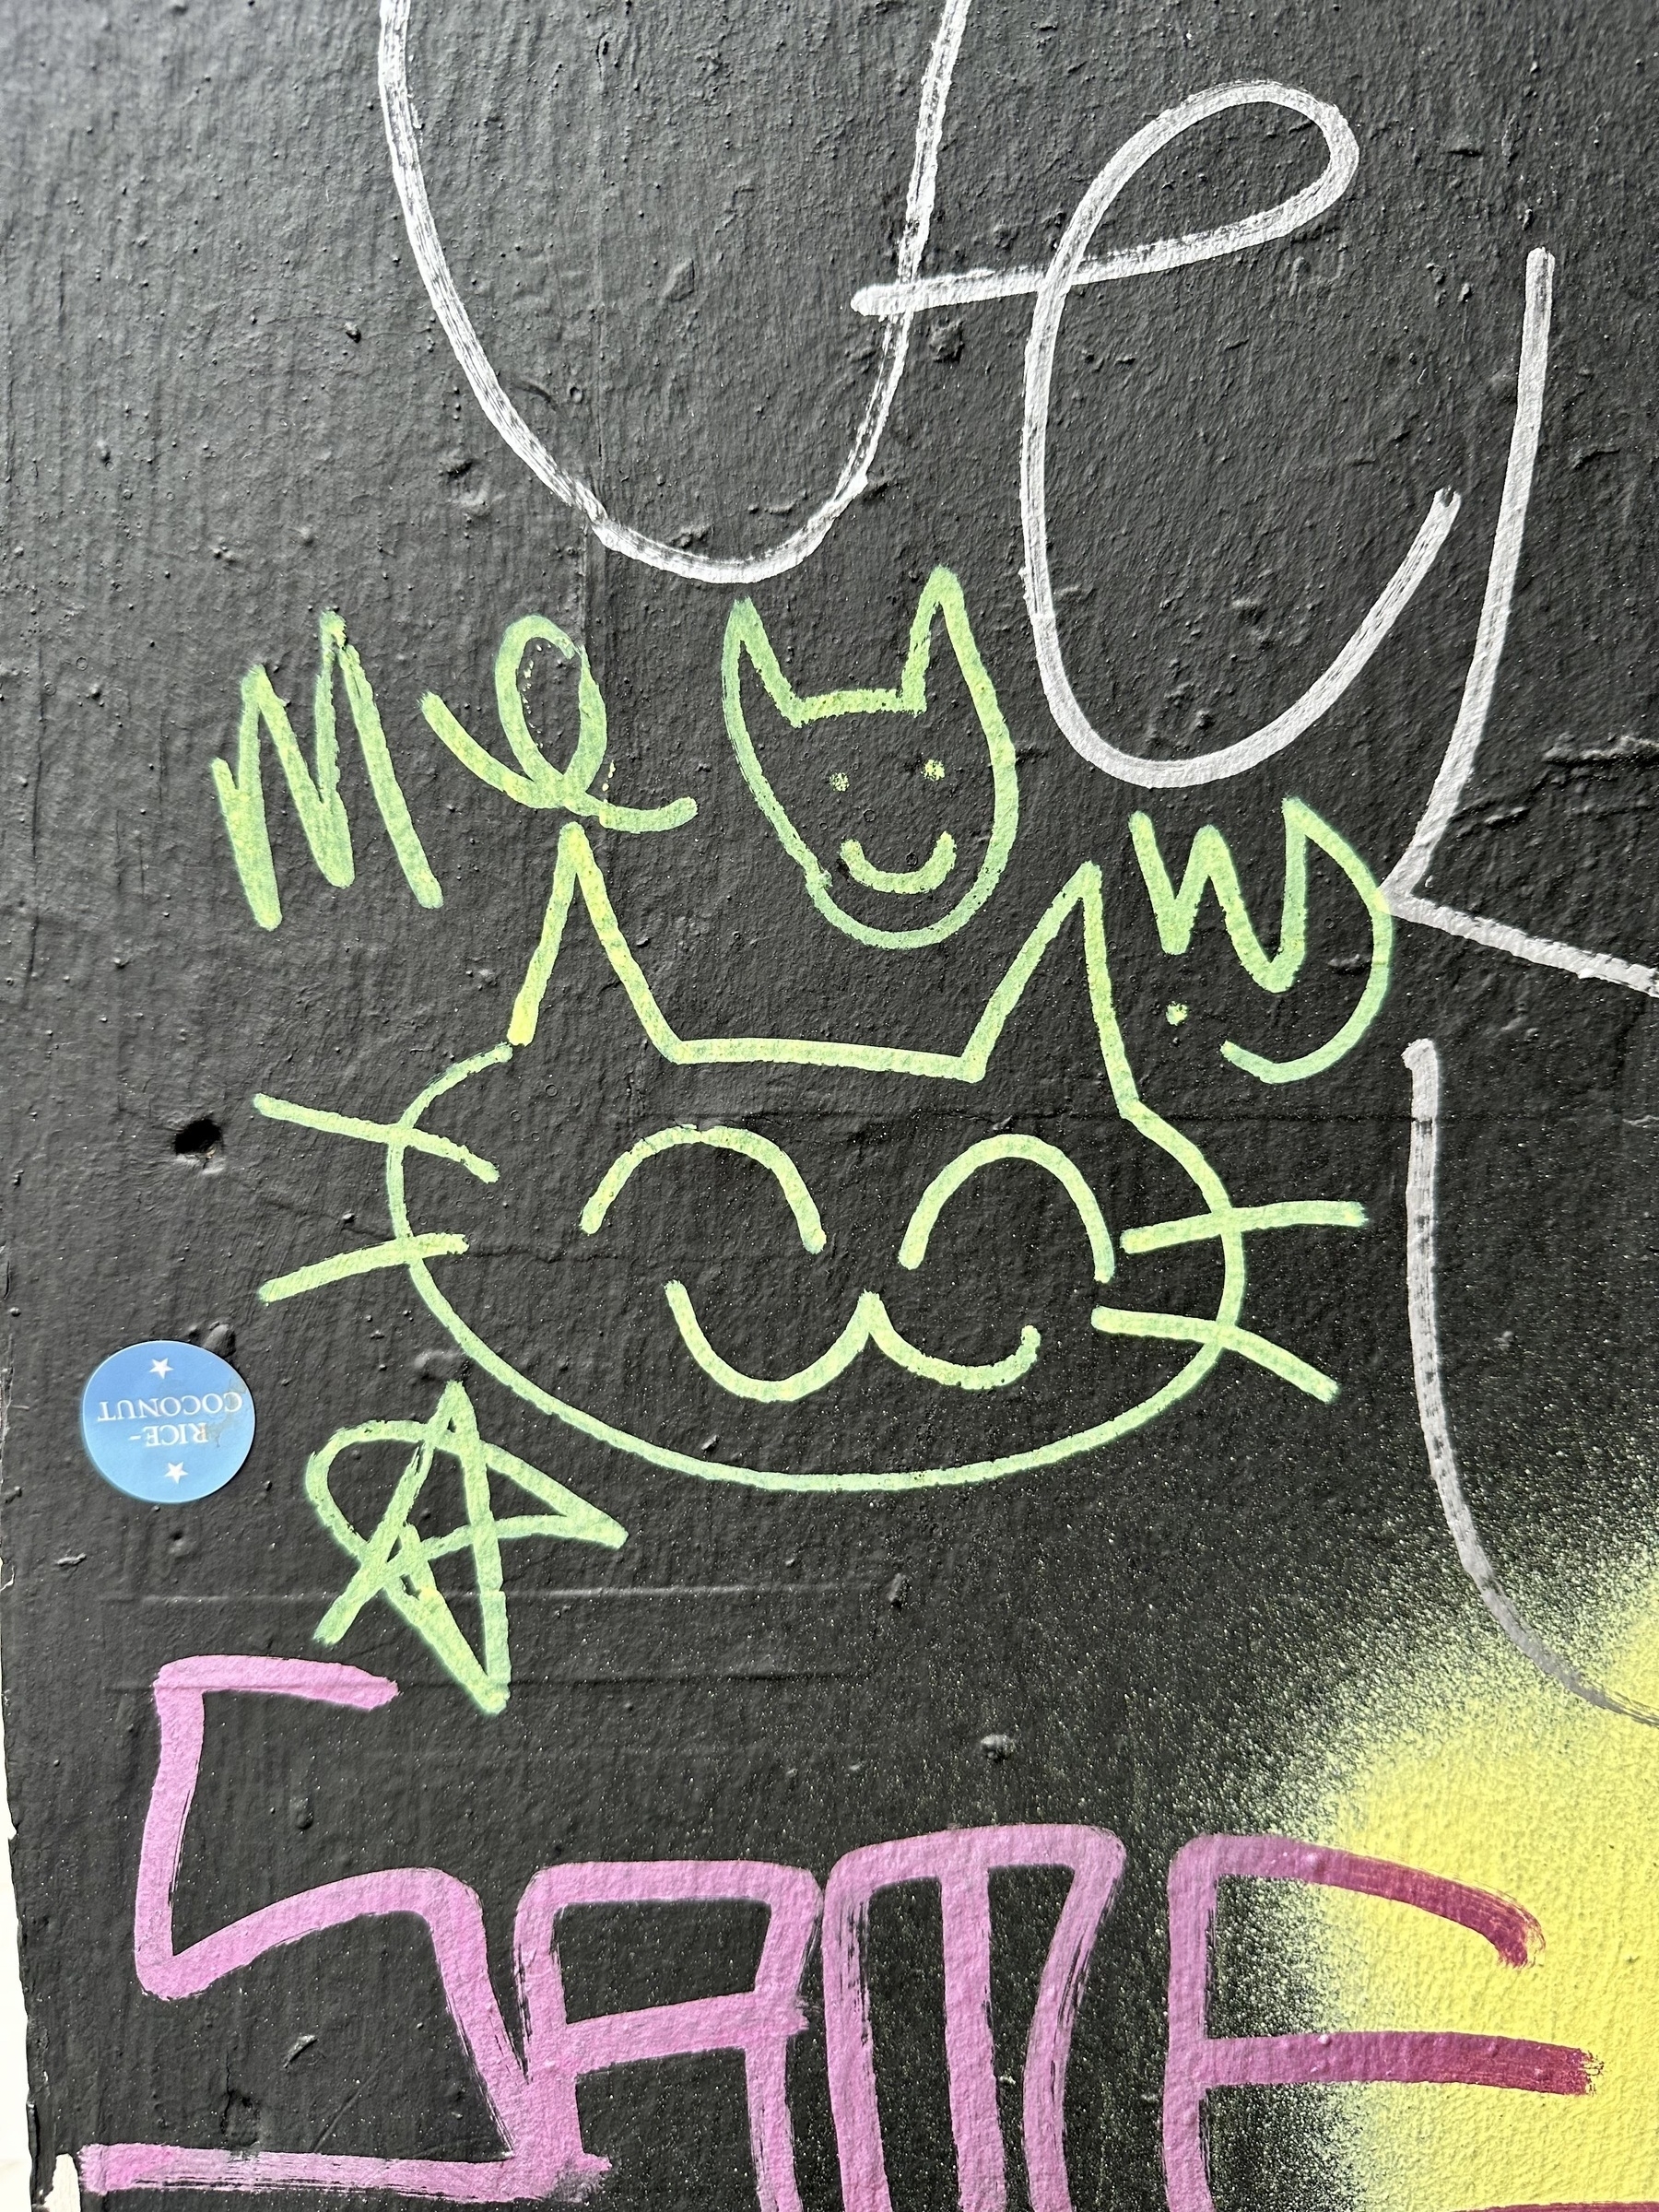 Graffiti of a smiling cat face, in yellow on a black background.